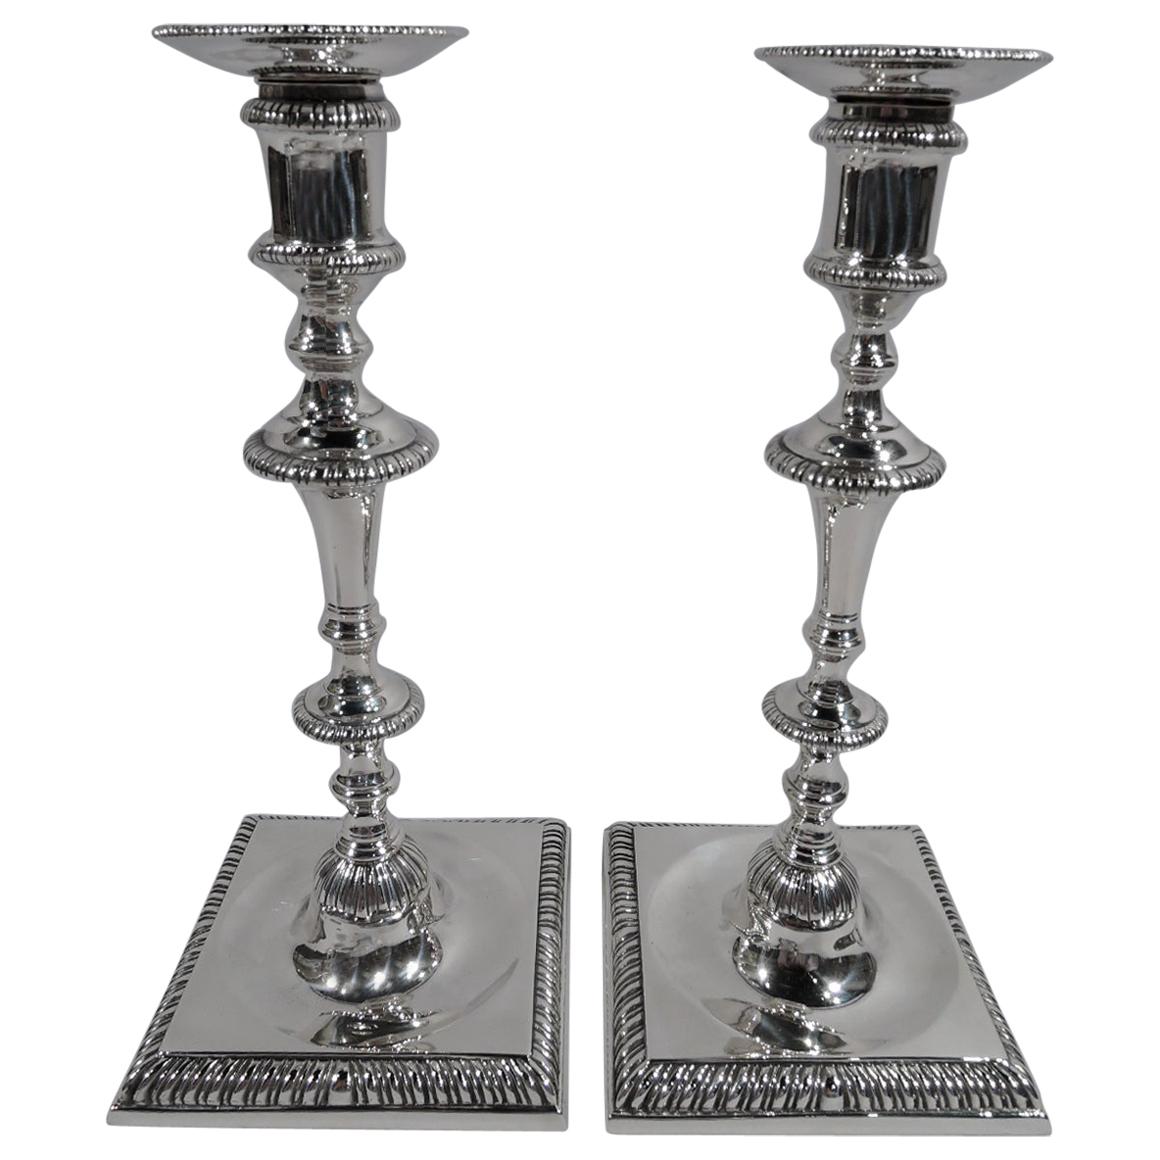 Pair of Antique Georgian Sterling Silver Candlesticks by Crichton